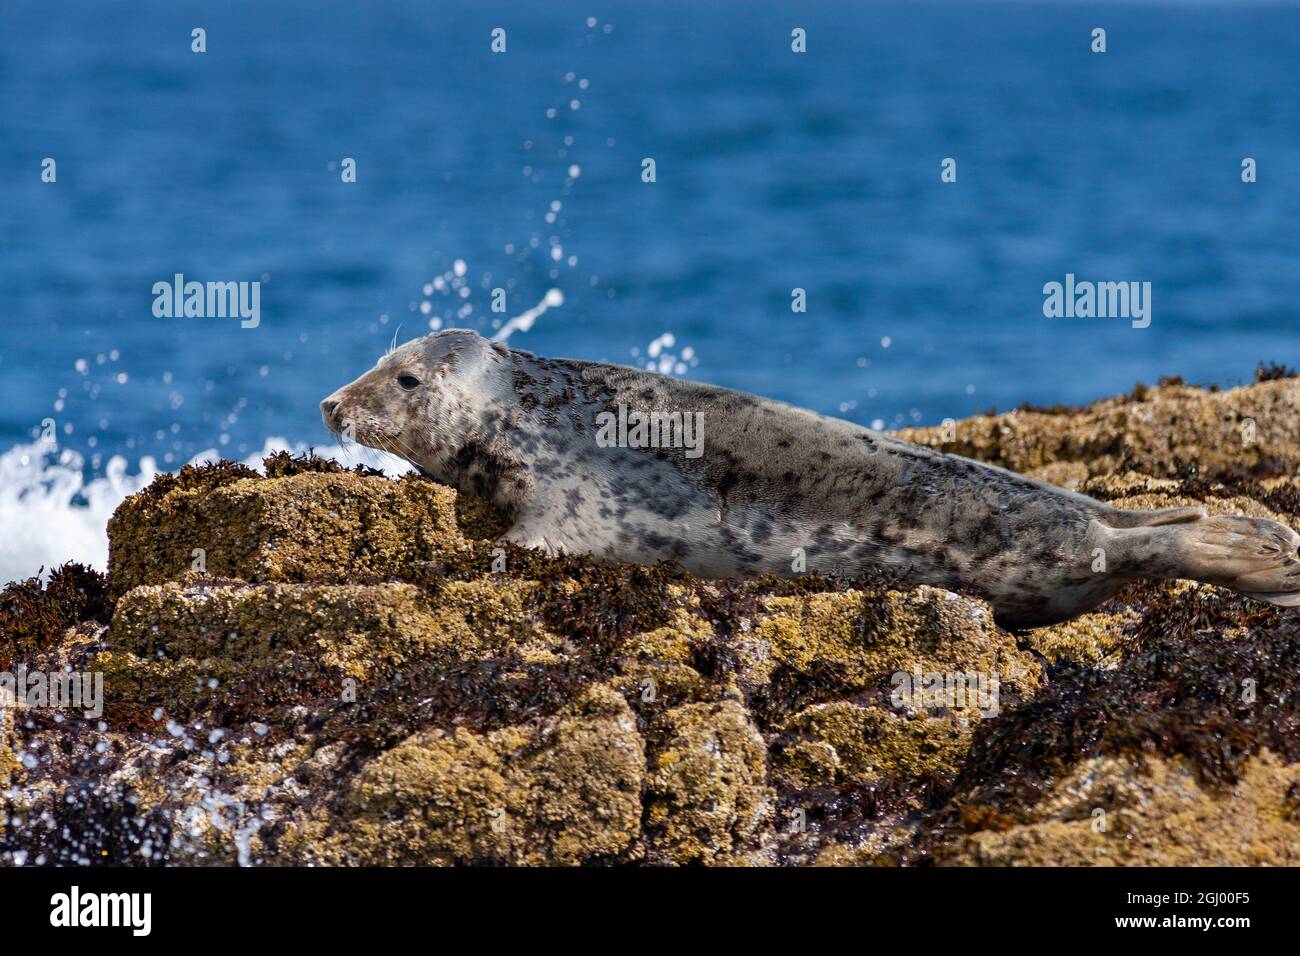 A young Grey Seal (Halichoerus grypus atlantica) on coastal rocks. This animal is part way through molting its pup fur to reveal its adult fur. Stock Photo